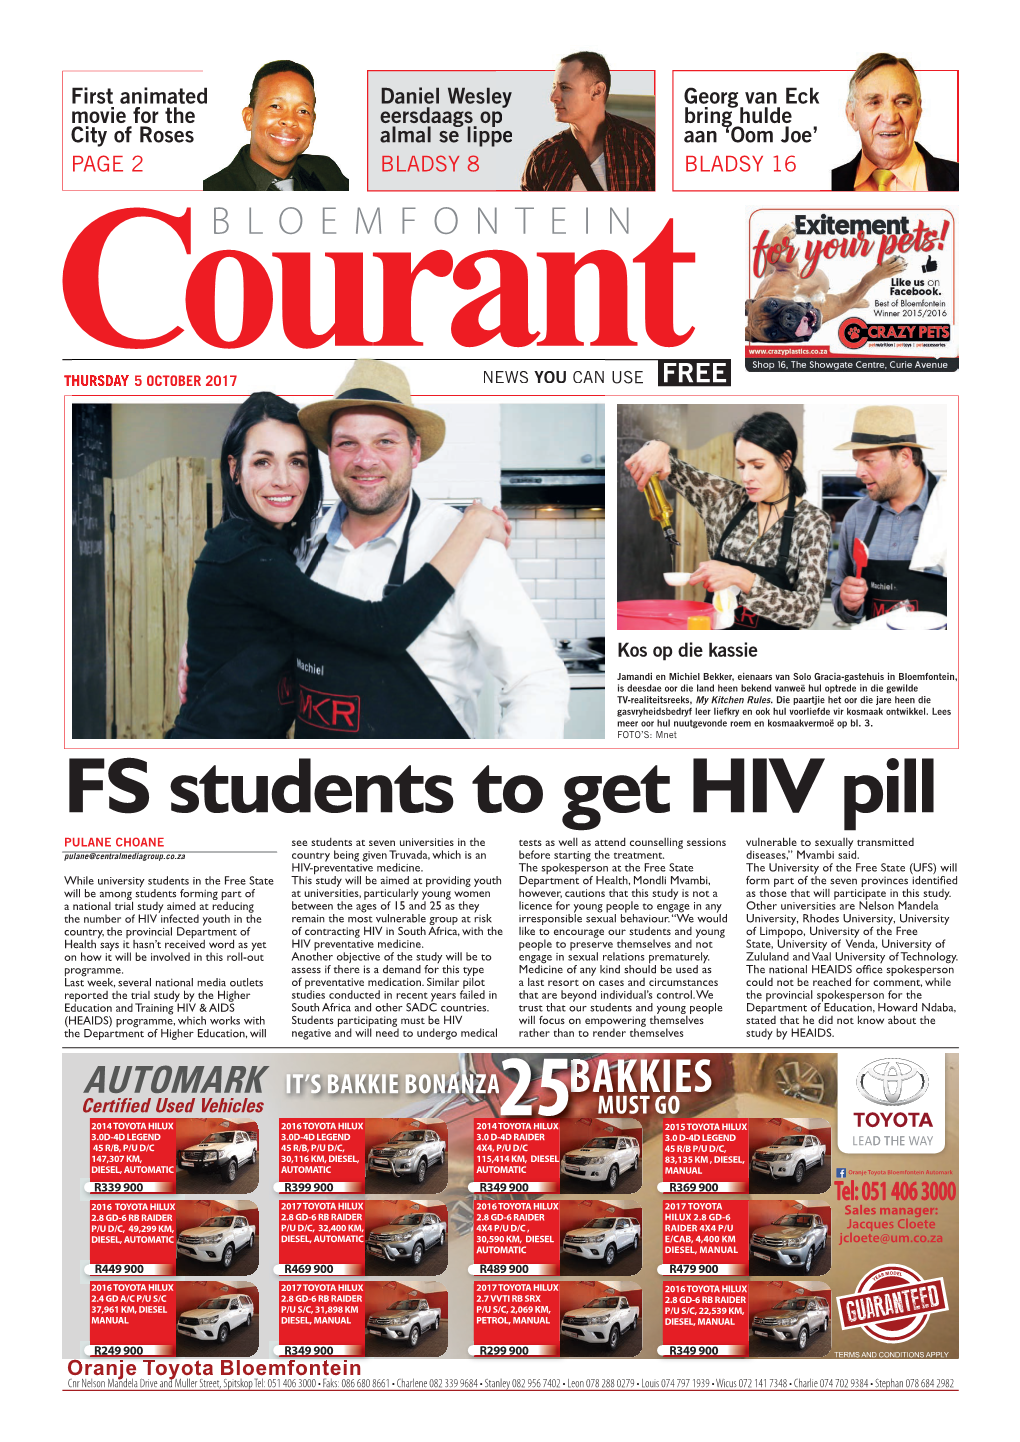 FS Students to Get HIV Pill